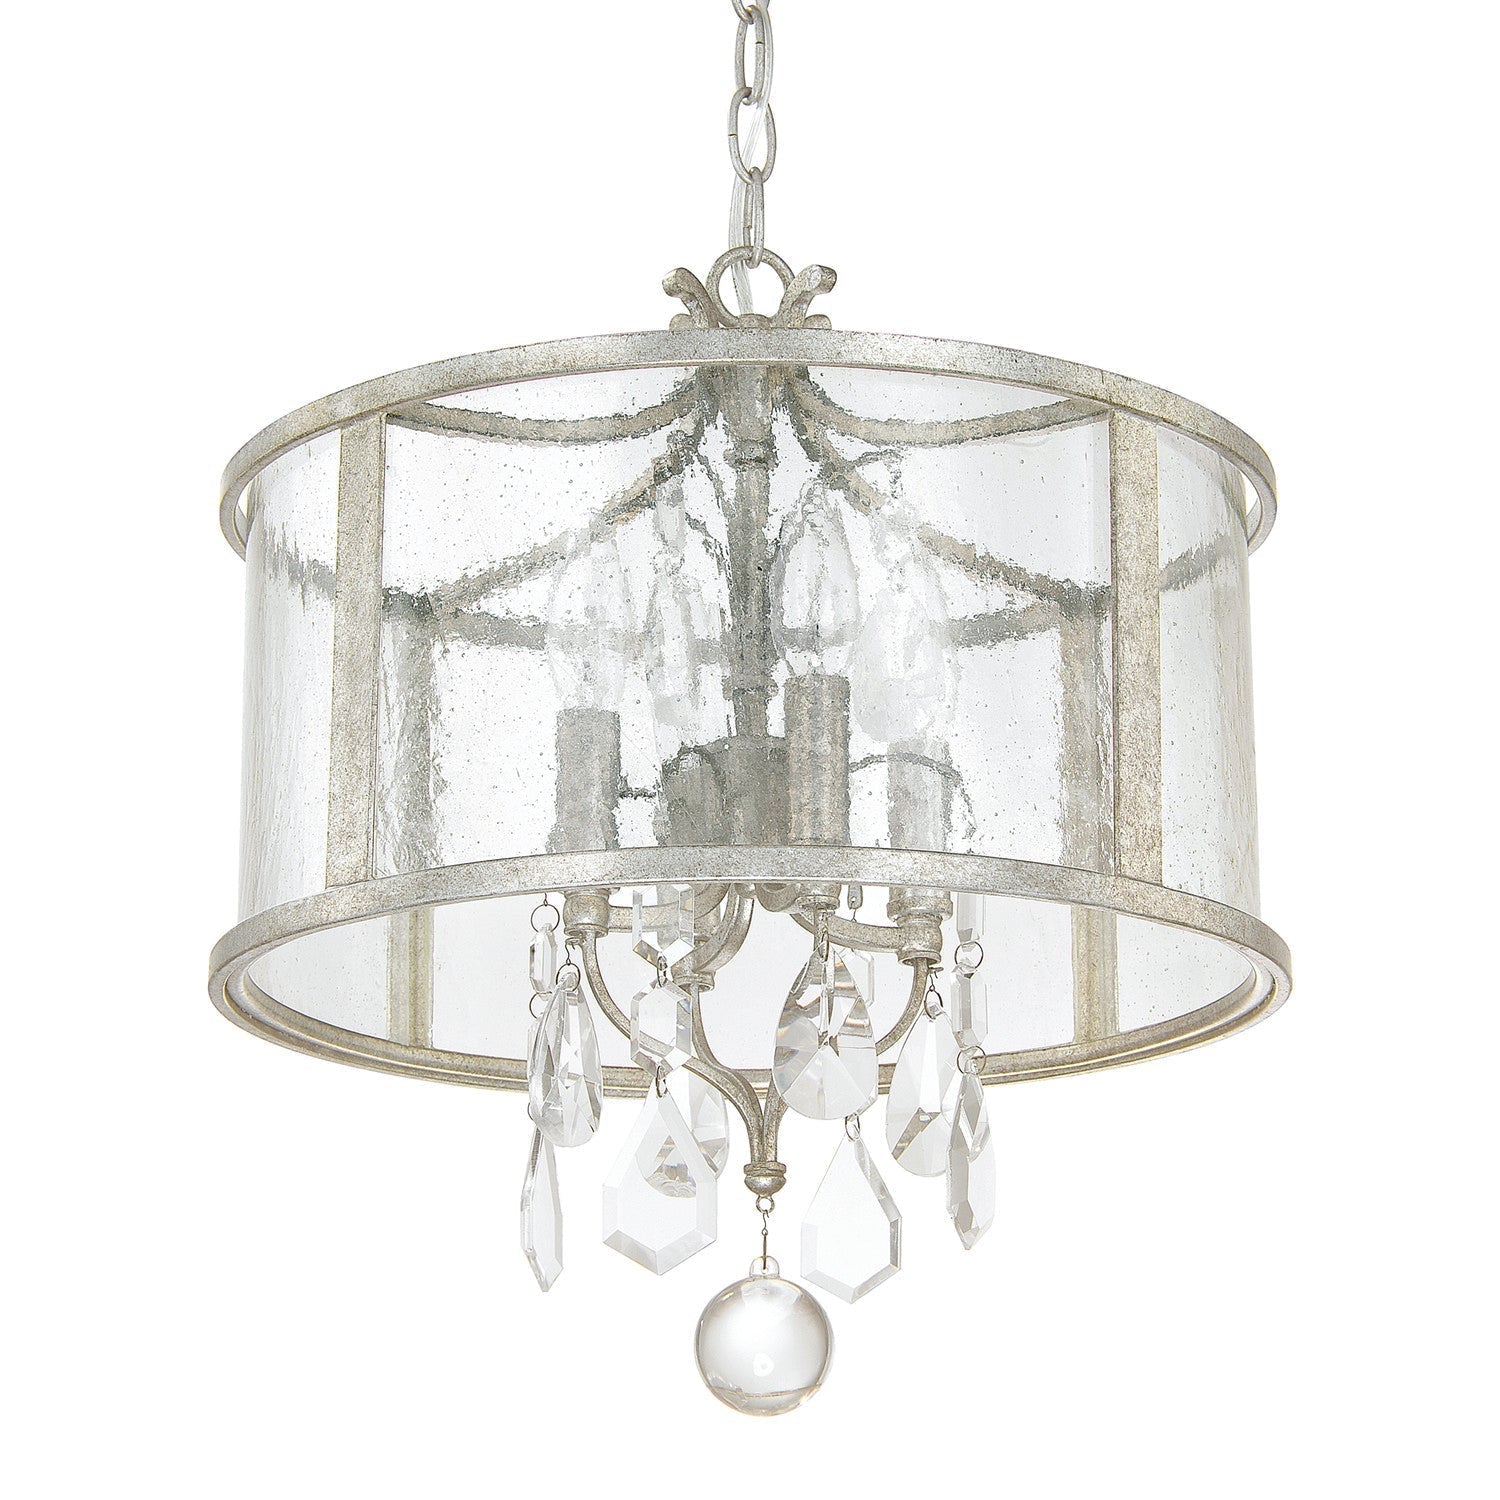 Capital Blakely 9484AS-CR Pendant Light - Antique Silver